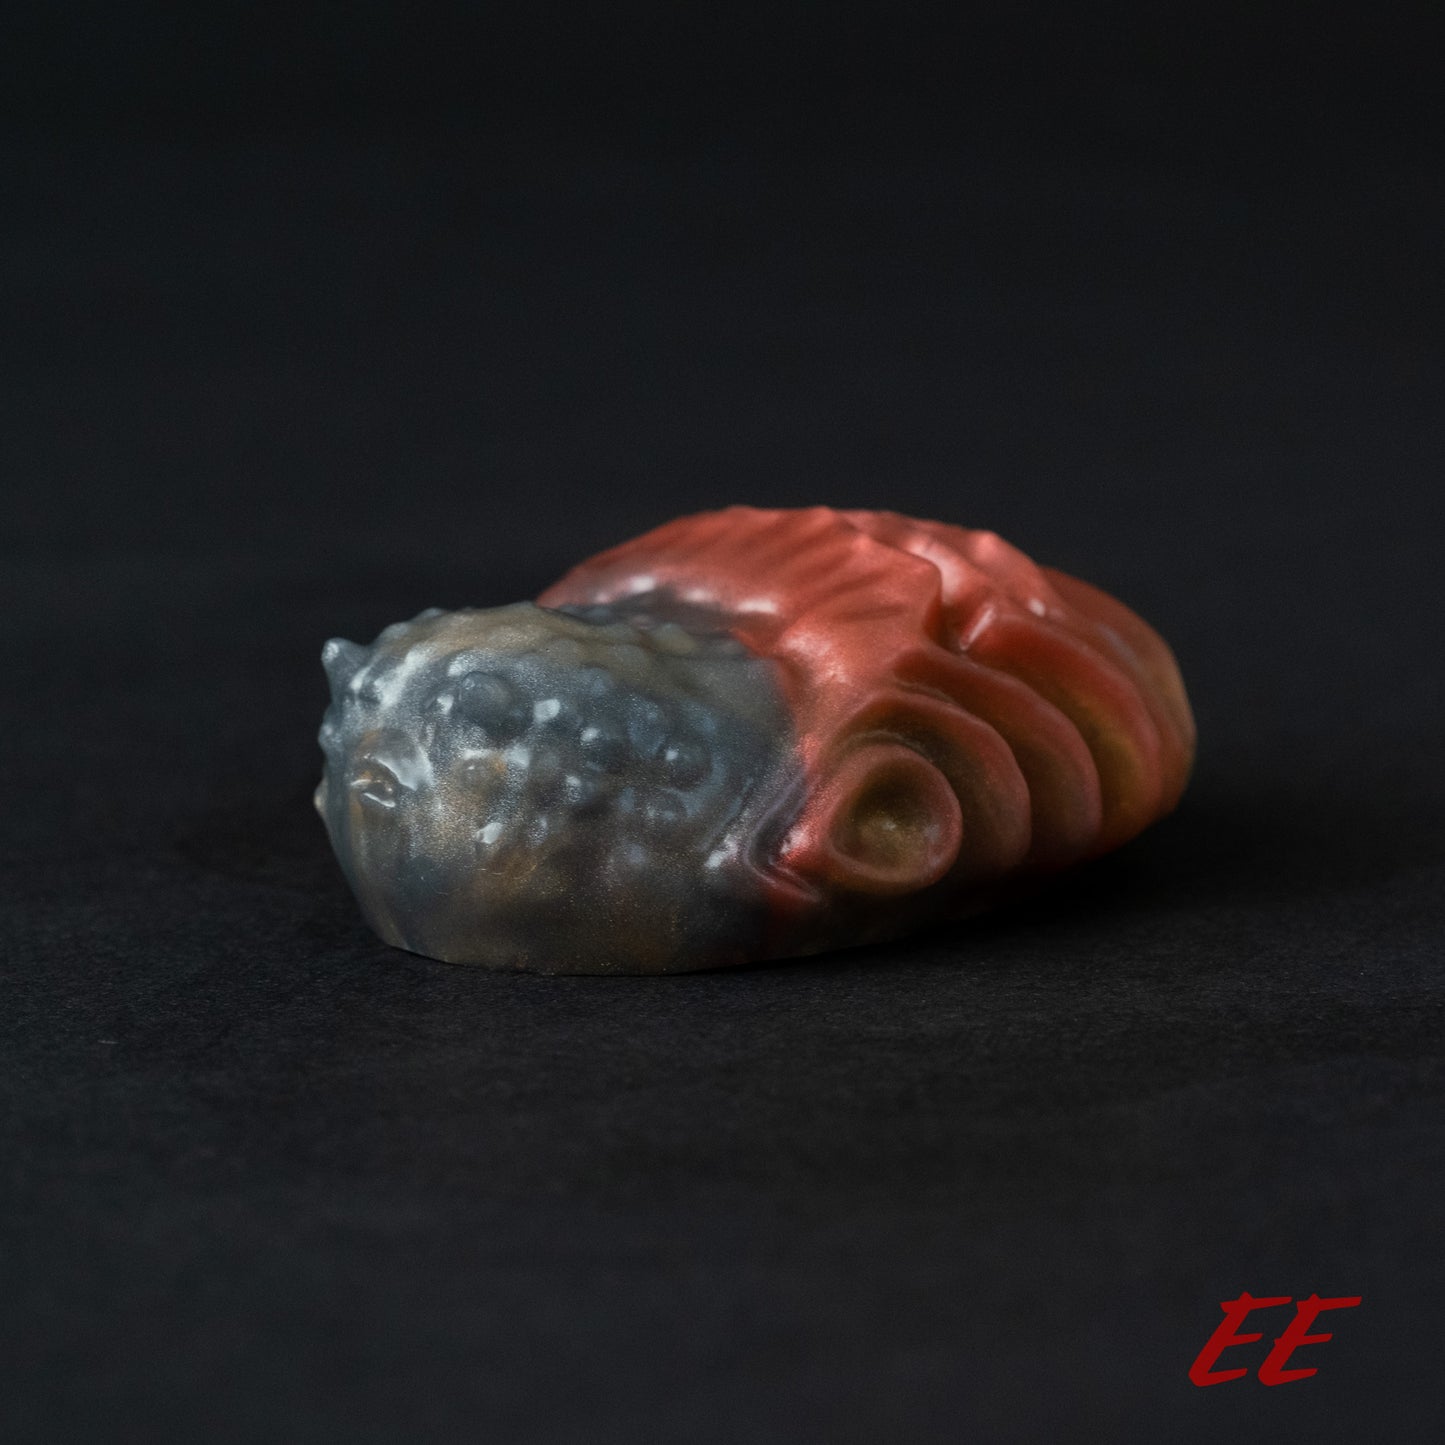 Edgar Silicone Grindable/Squishy - Shimmery Red/Black/Gold - Soft Firmness